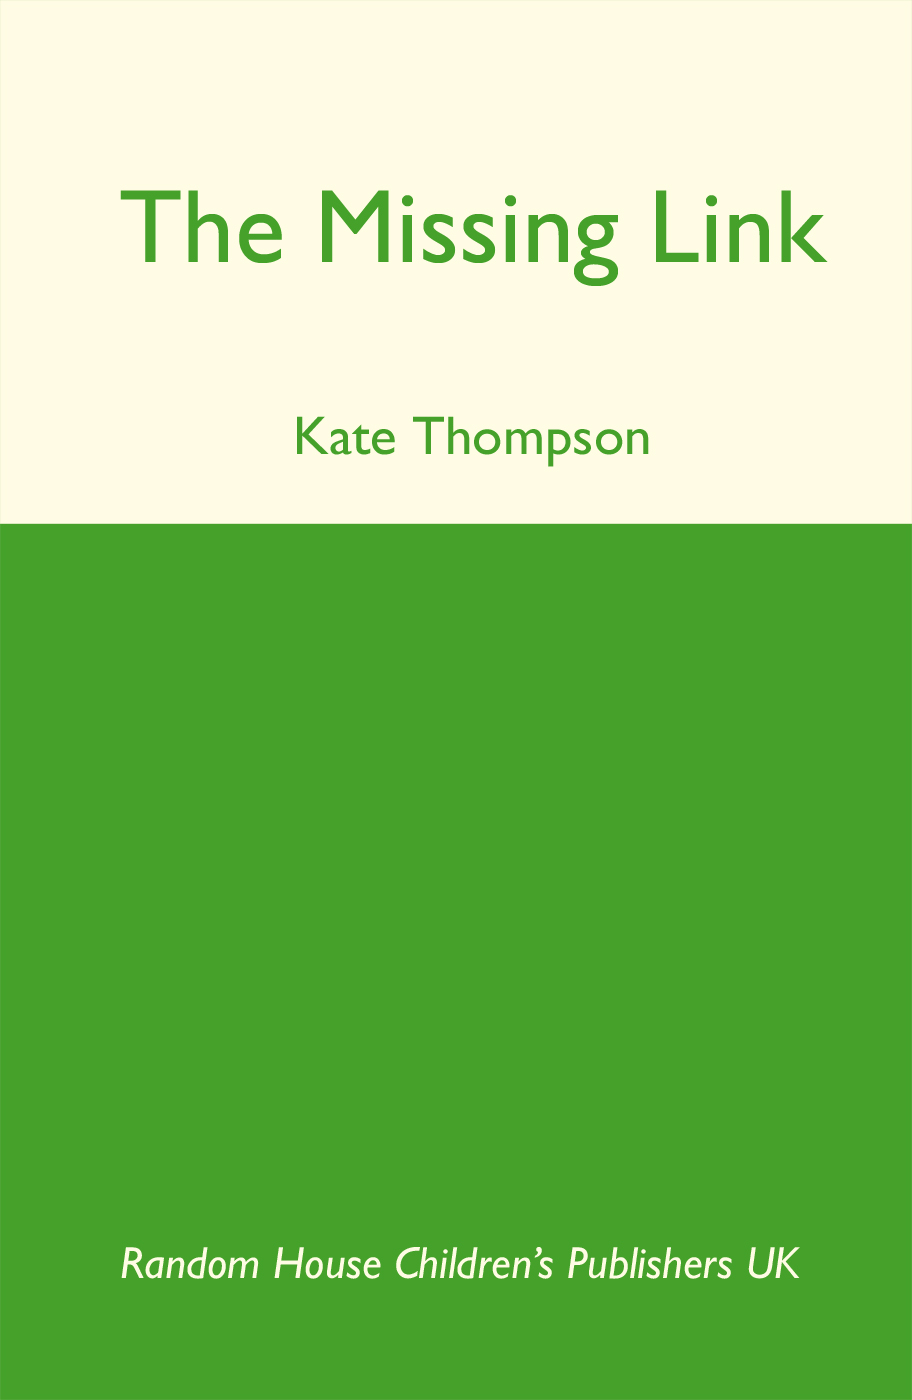 The Missing Link by Kate Thompson